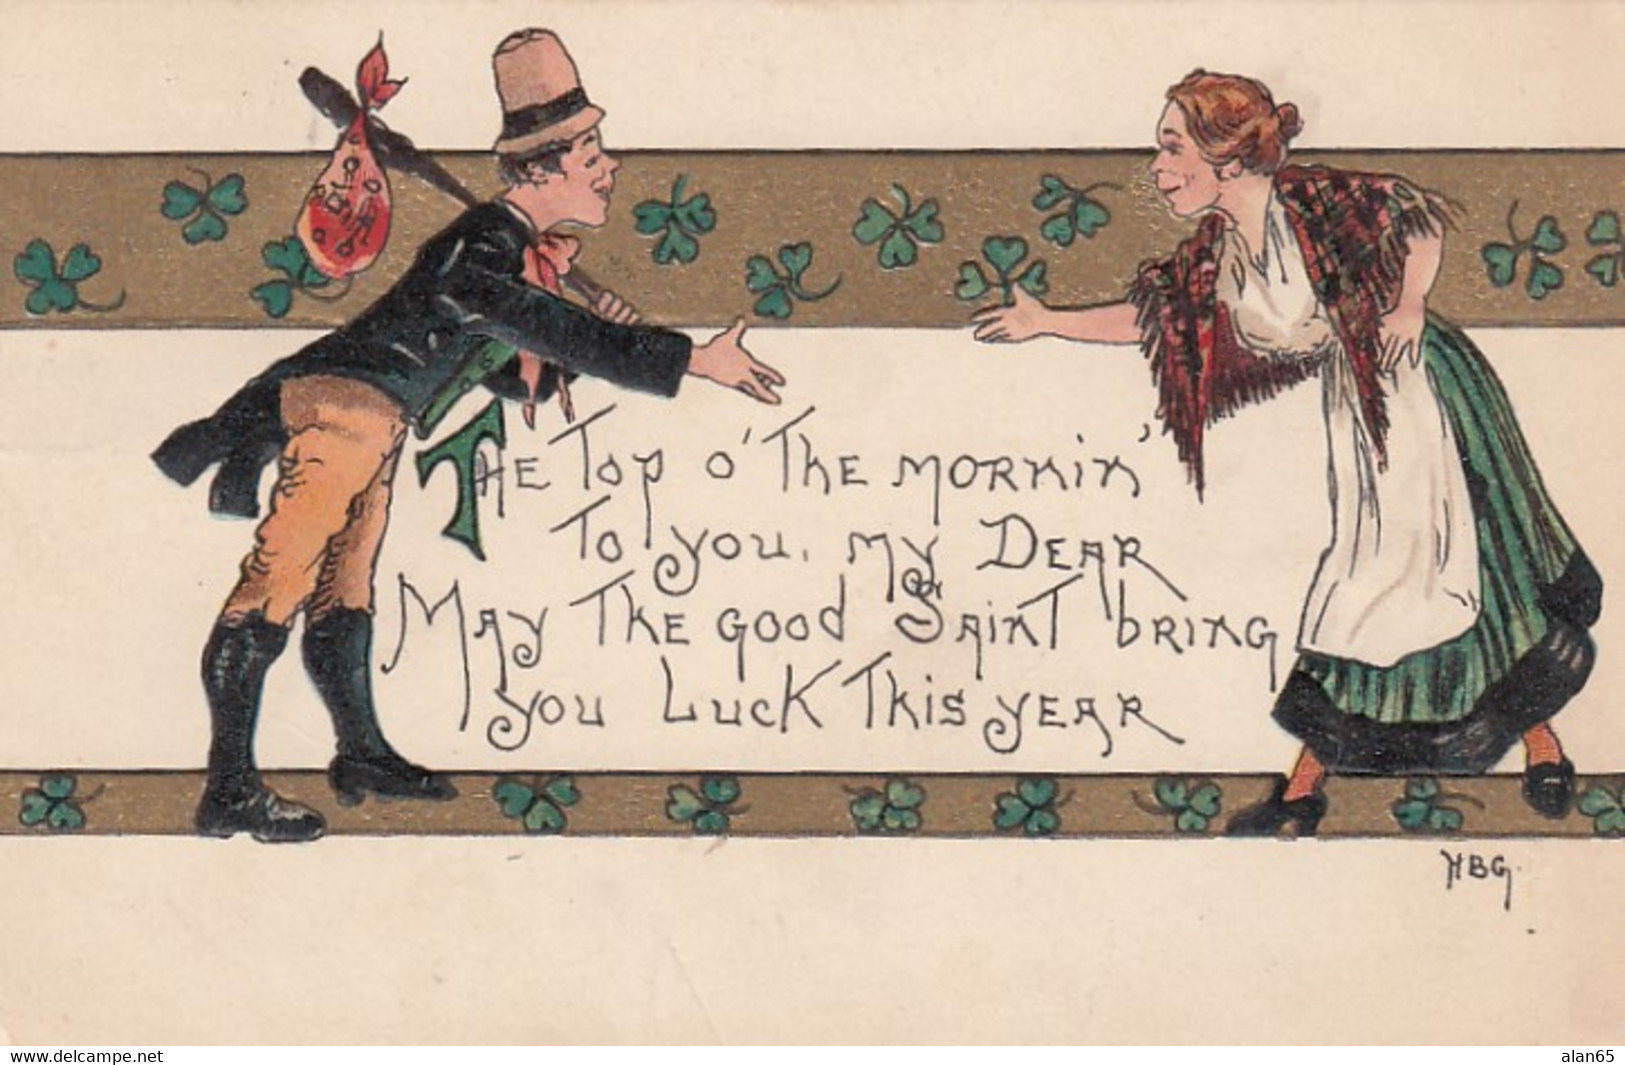 St. Patrick's Day, H.B. Griggs Artist Signed Man Greets Woman, C1900s/10s Vintage Embossed Postcard - Saint-Patrick's Day